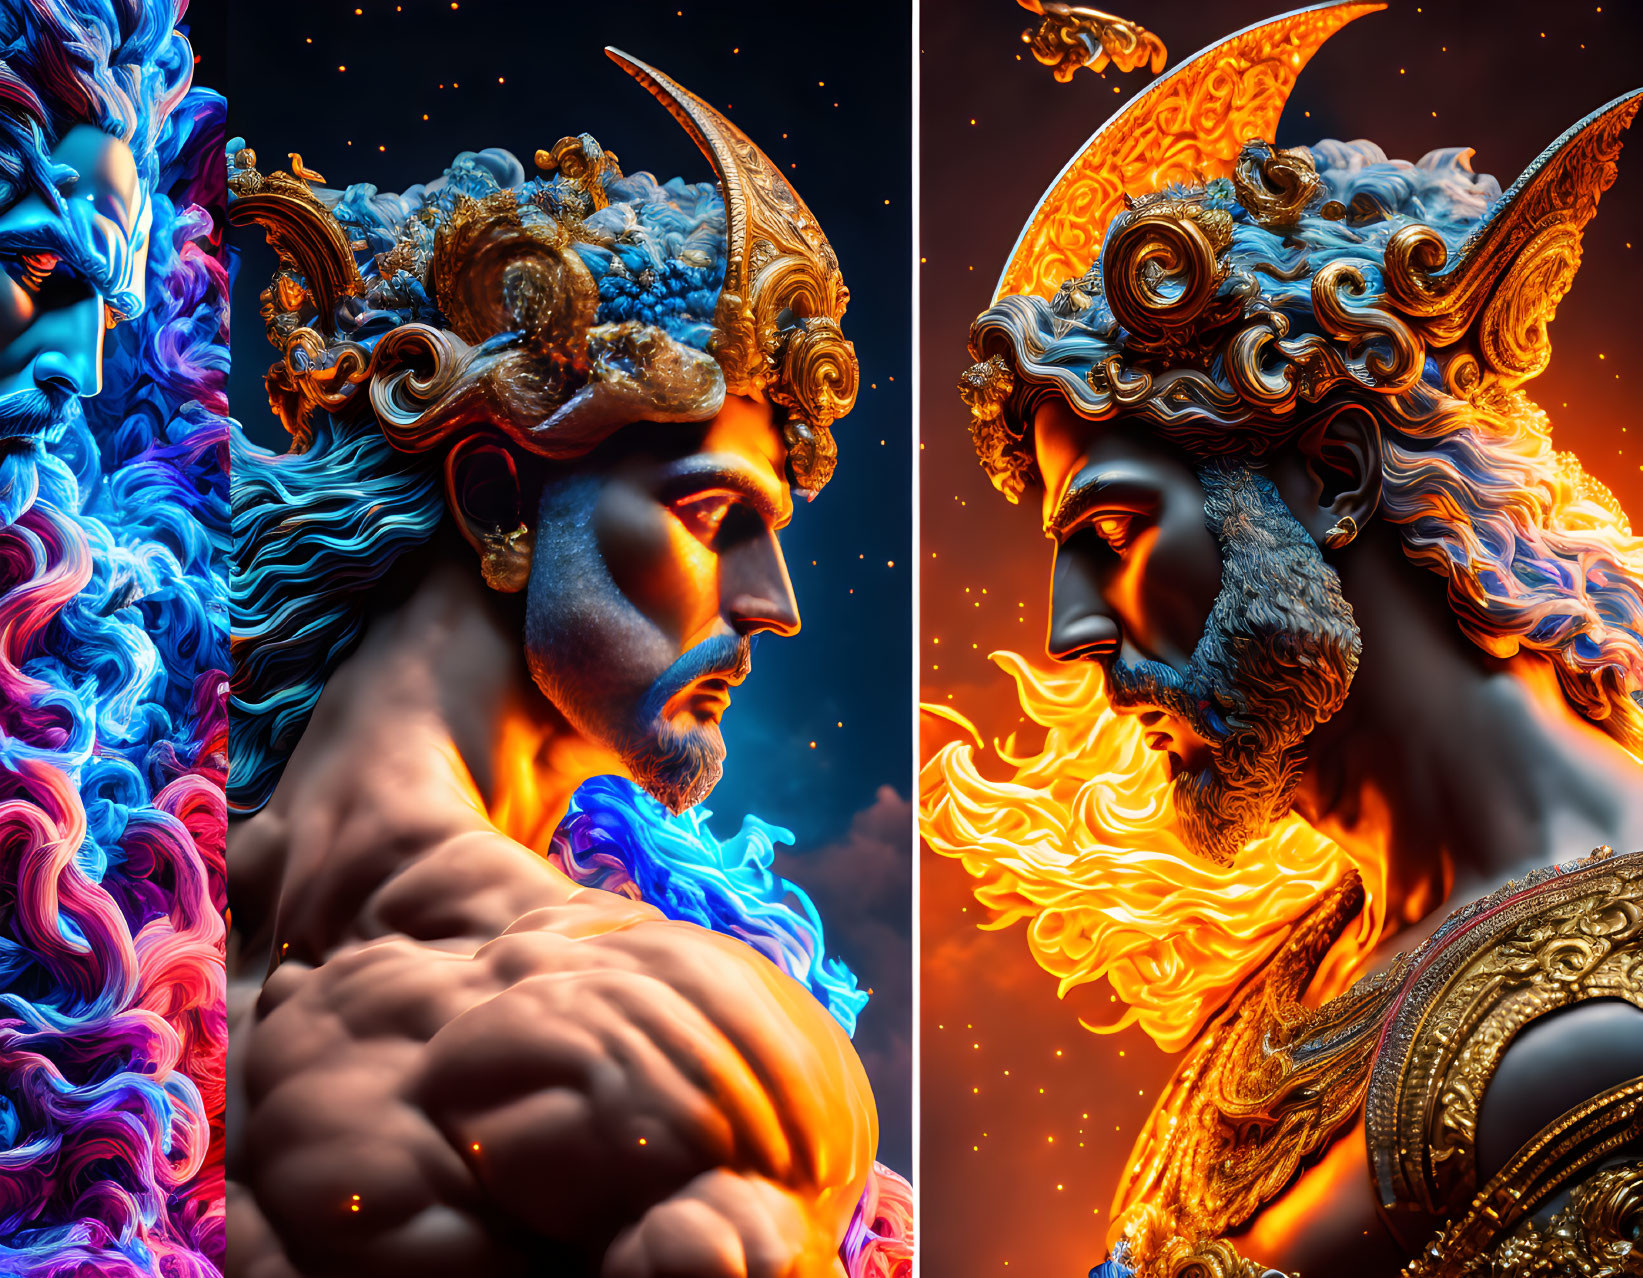 Man Split Image Symbolizing Day and Night with Sun and Moon Elements in Blue and Orange Tones